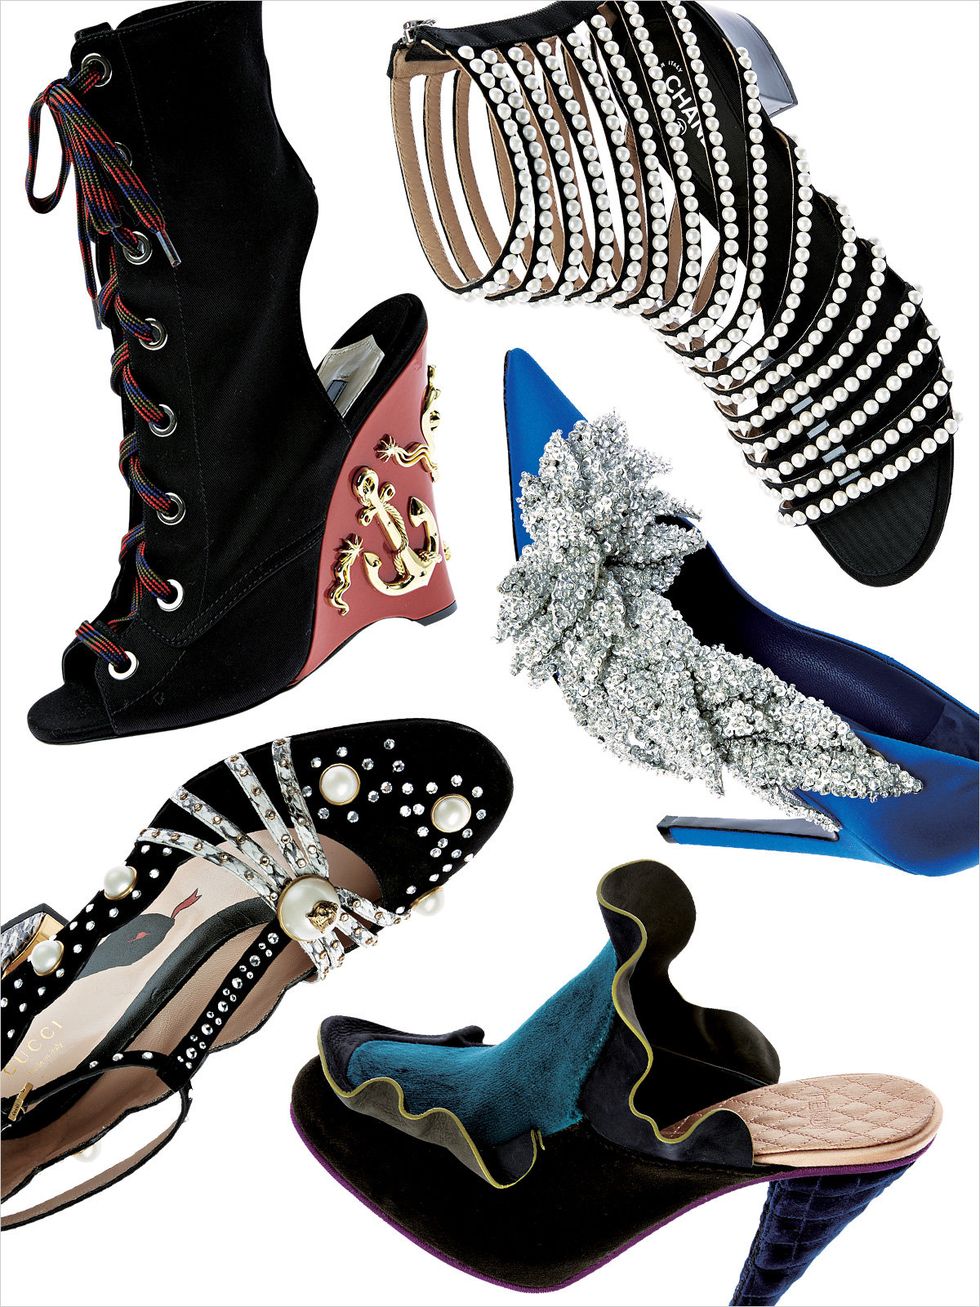 Boot, Fashion, Sandal, Fashion design, Costume accessory, Guitar accessory, Synthetic rubber, Sock, Leather, 